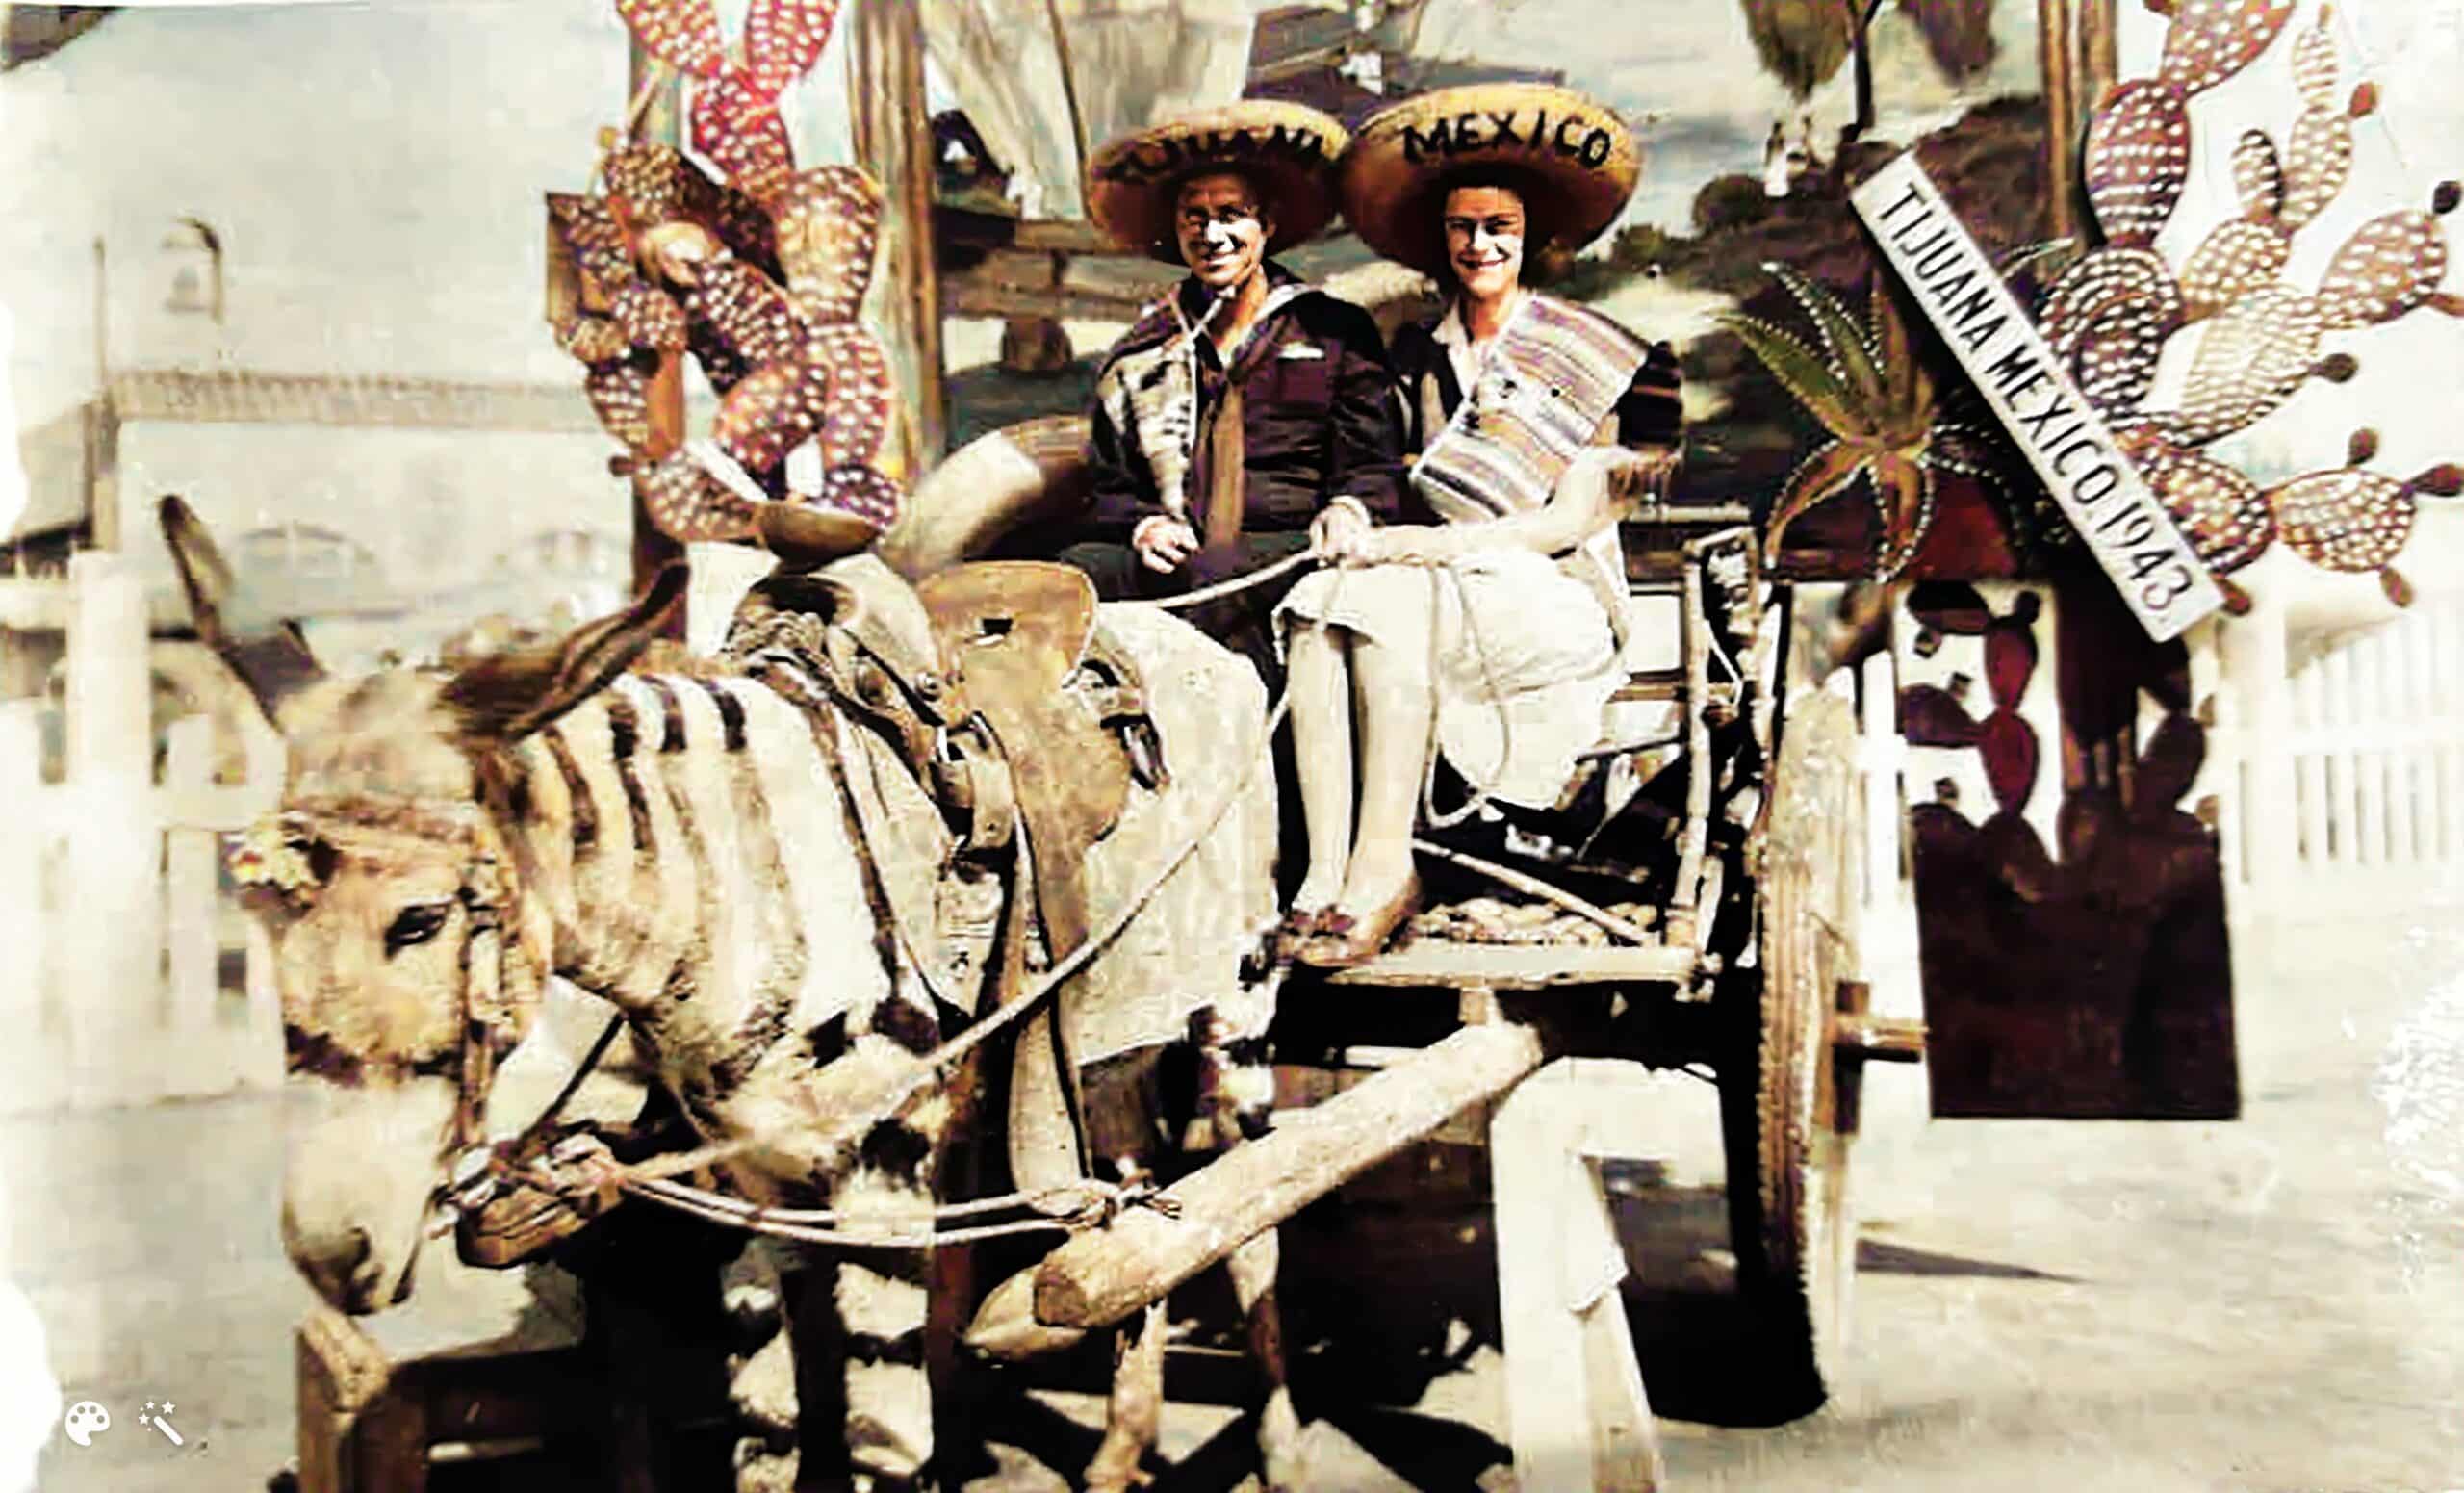 Claude and Marie on their honeymoon in Mexico, 1943. Photo colorized and enhanced by MyHeritage